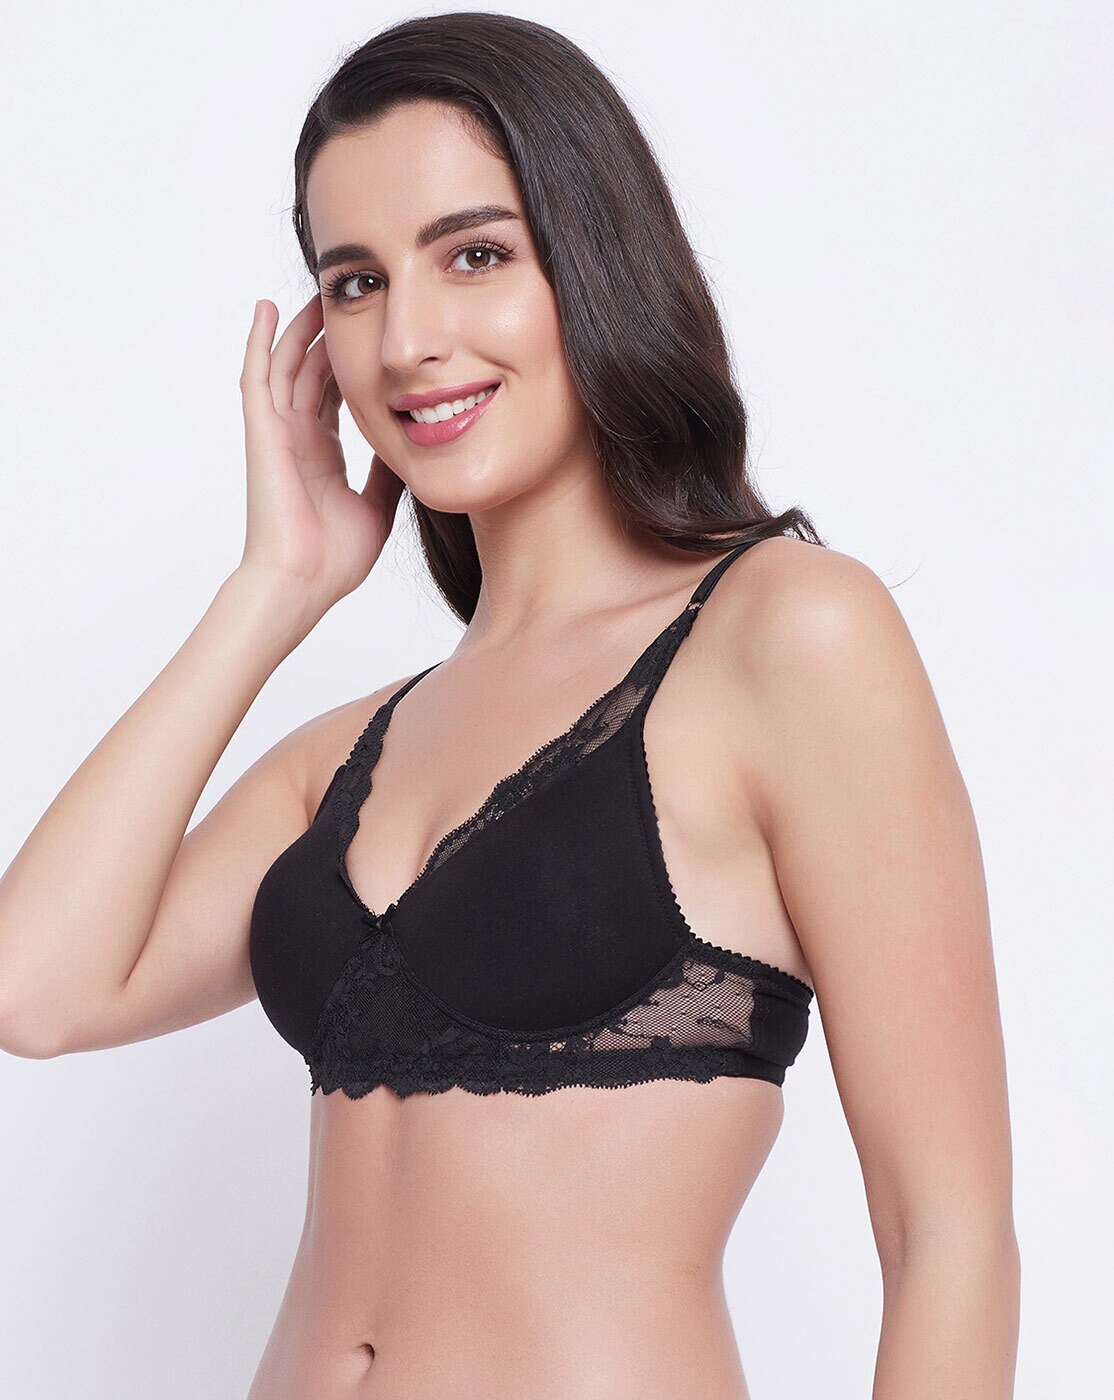 Cotton Lightly Padded Demi Cup Non-Wired Plunge Bra